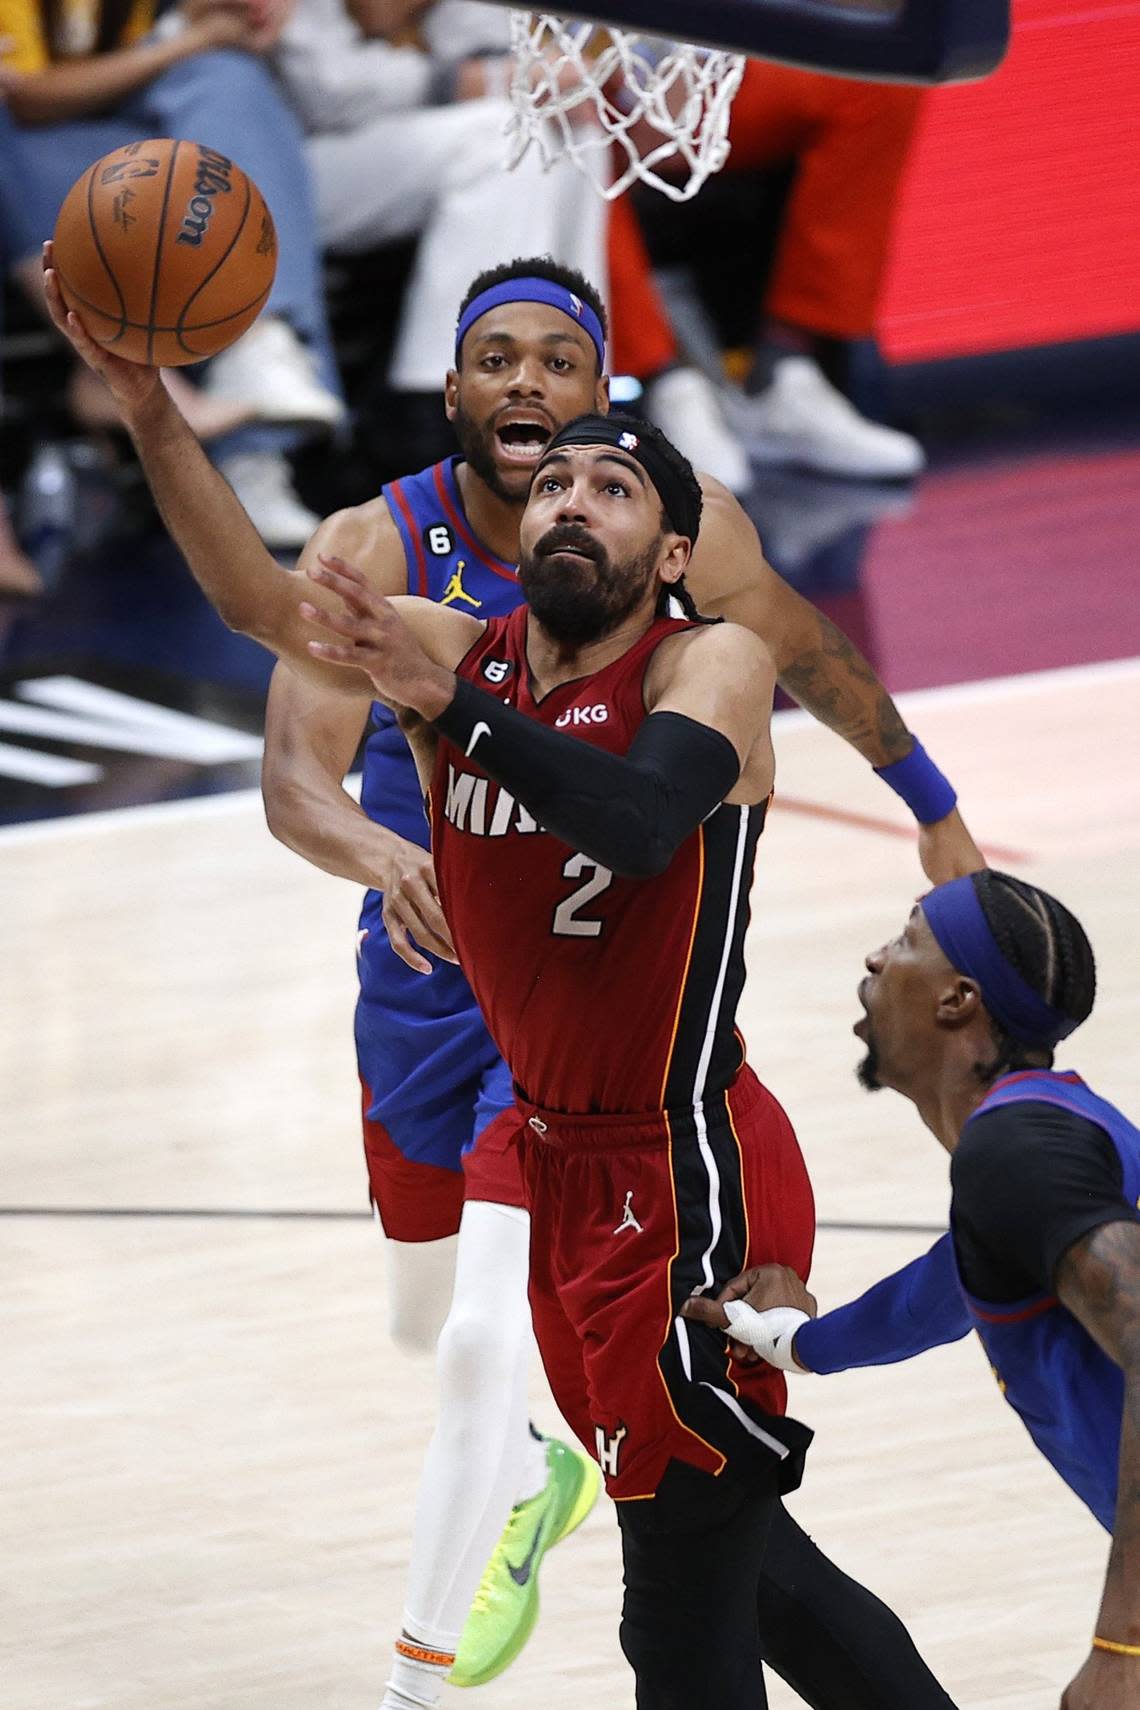 Jun 1, 2023; Denver, CO, USA; Miami Heat guard Gabe Vincent (2) goes to the basket during the fourth quarter in game one of the 2023 NBA Finals against the Denver Nuggets at Ball Arena. Mandatory Credit: Isaiah J. Downing-USA TODAY Sports